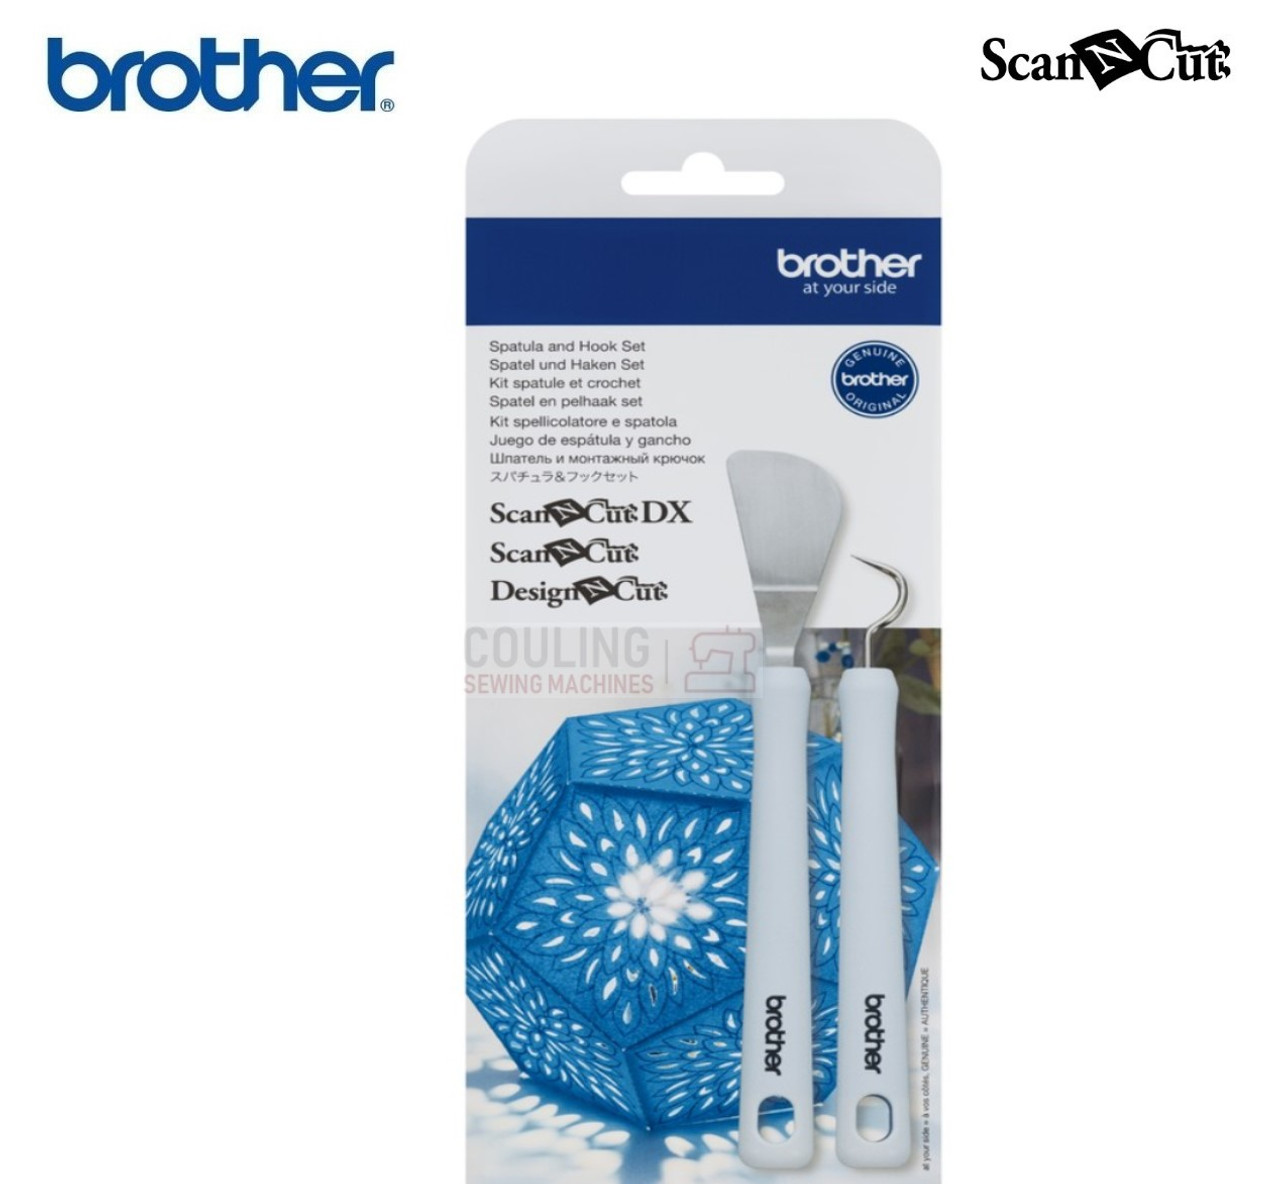 Brother ScanNCut Spatula and Hook Tool Set - CASPHK1 - Couling